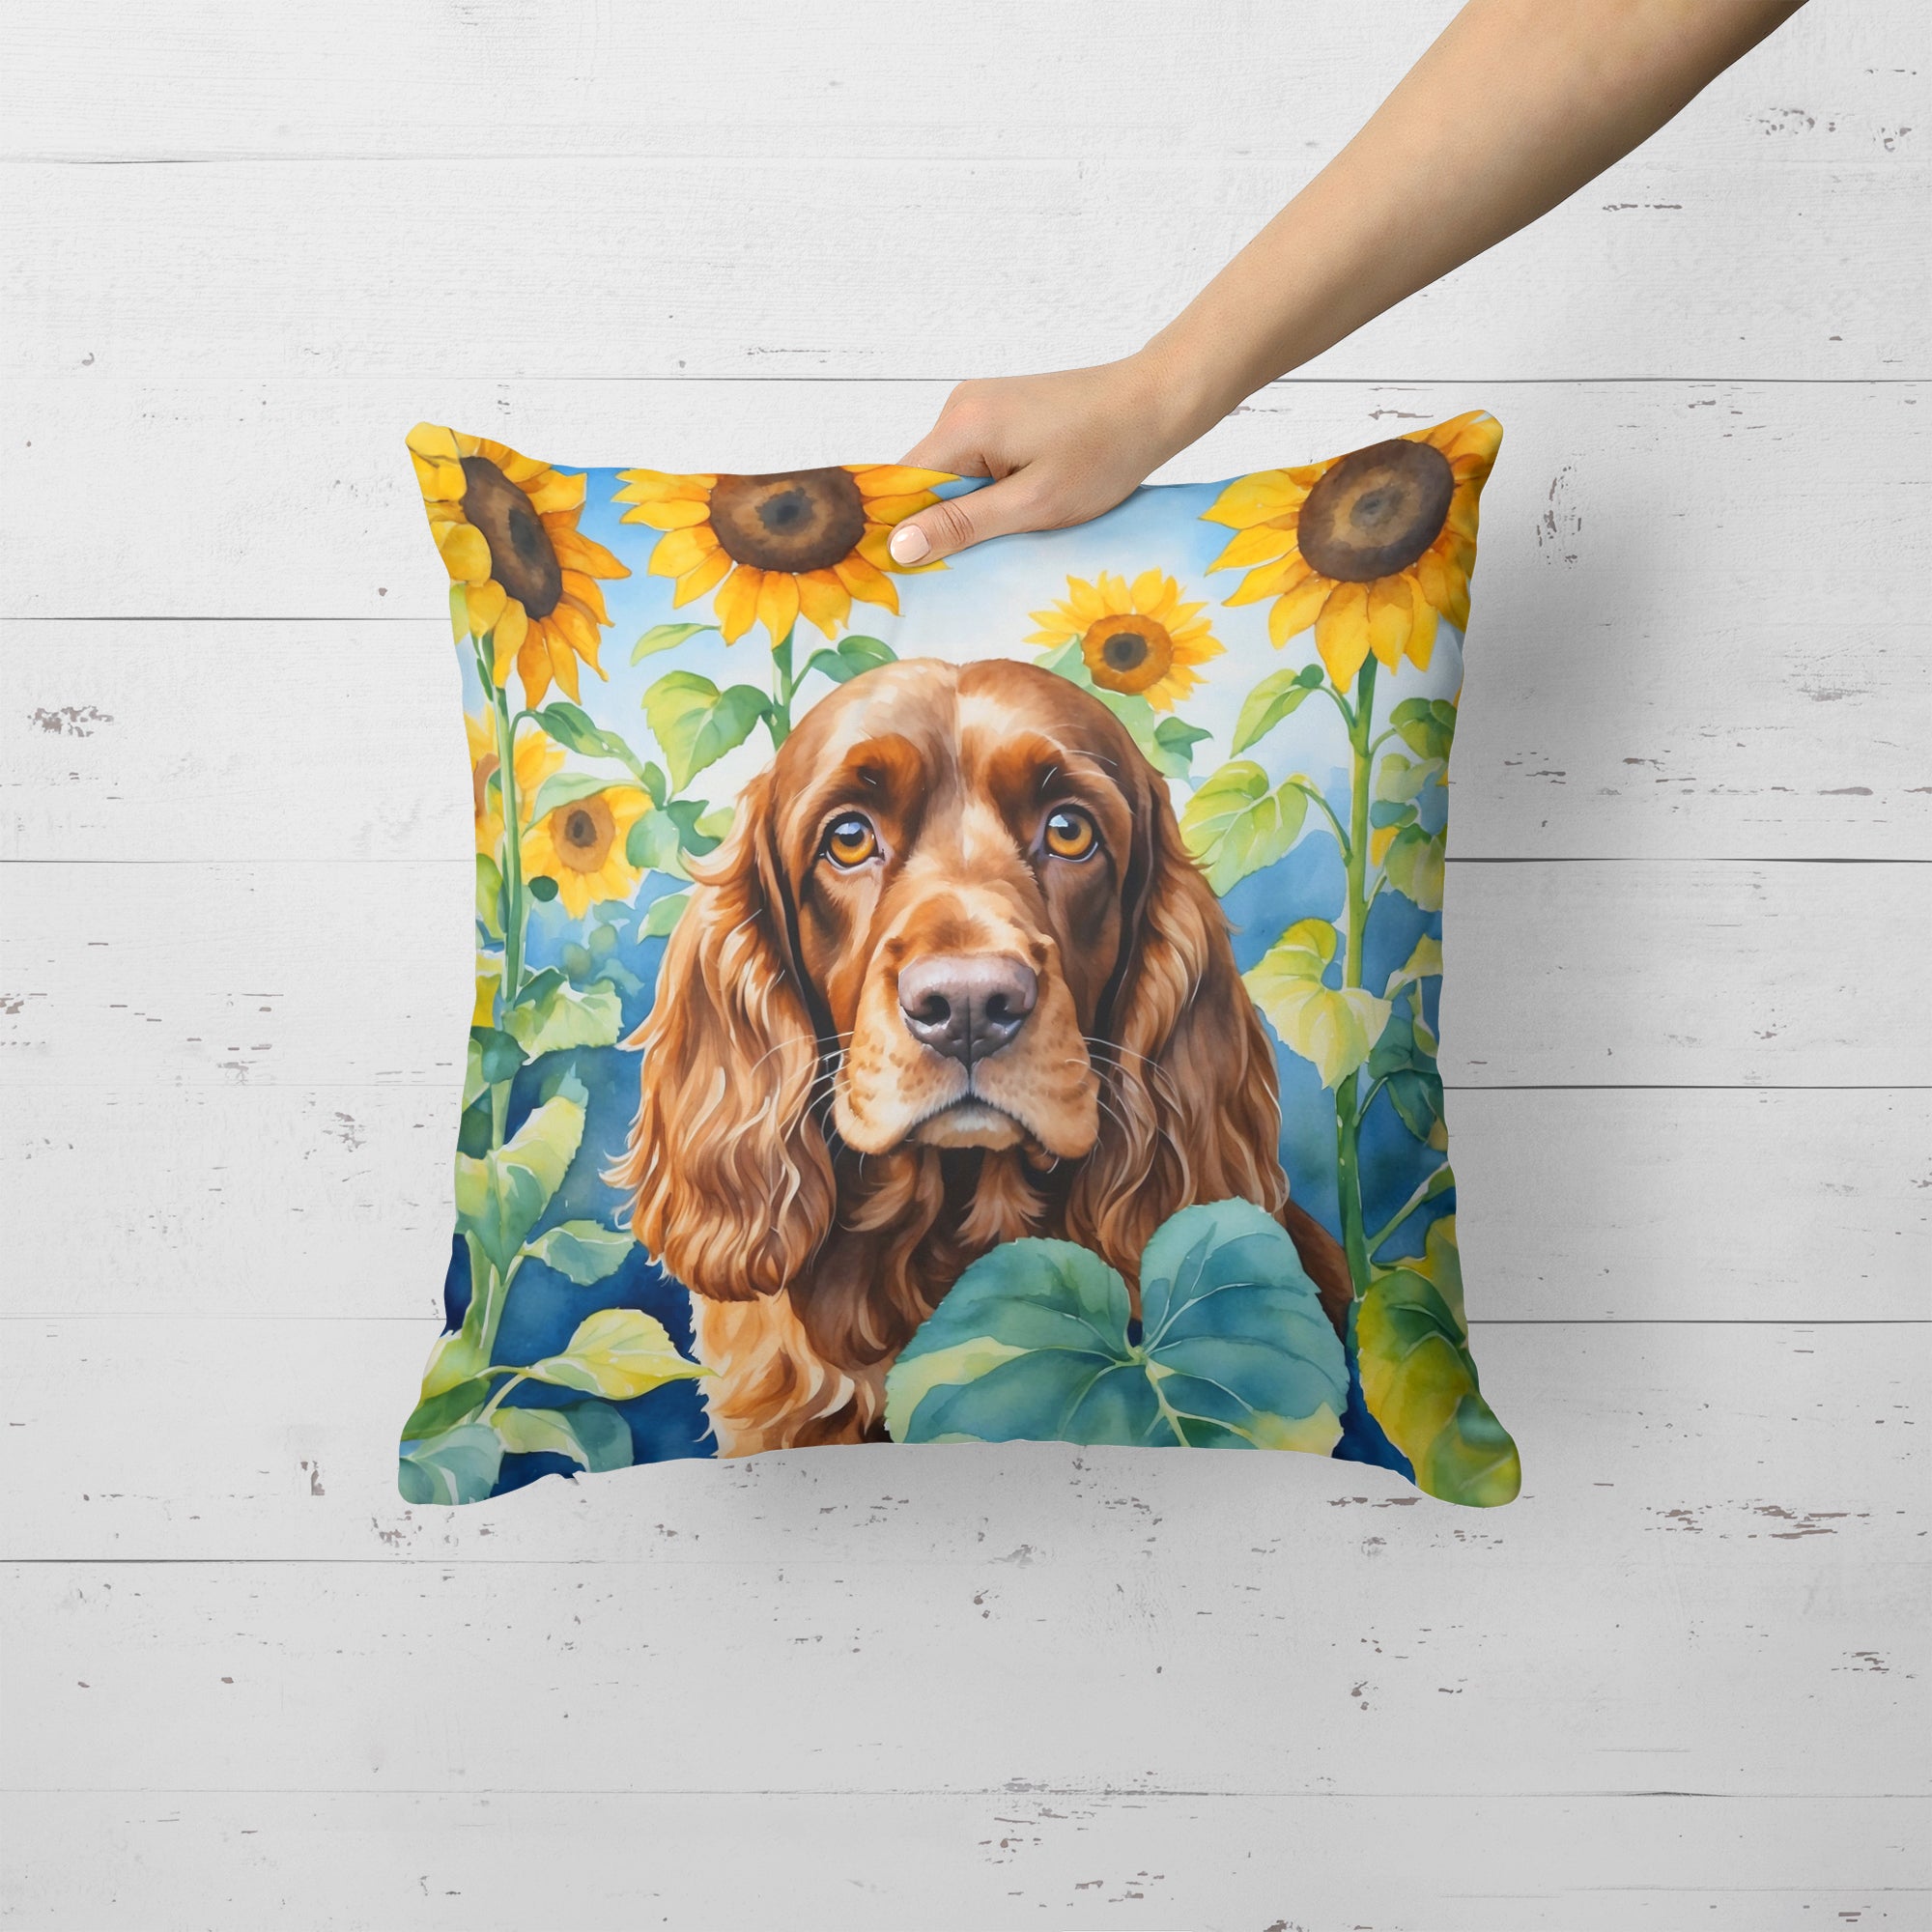 Buy this English Cocker Spaniel in Sunflowers Throw Pillow